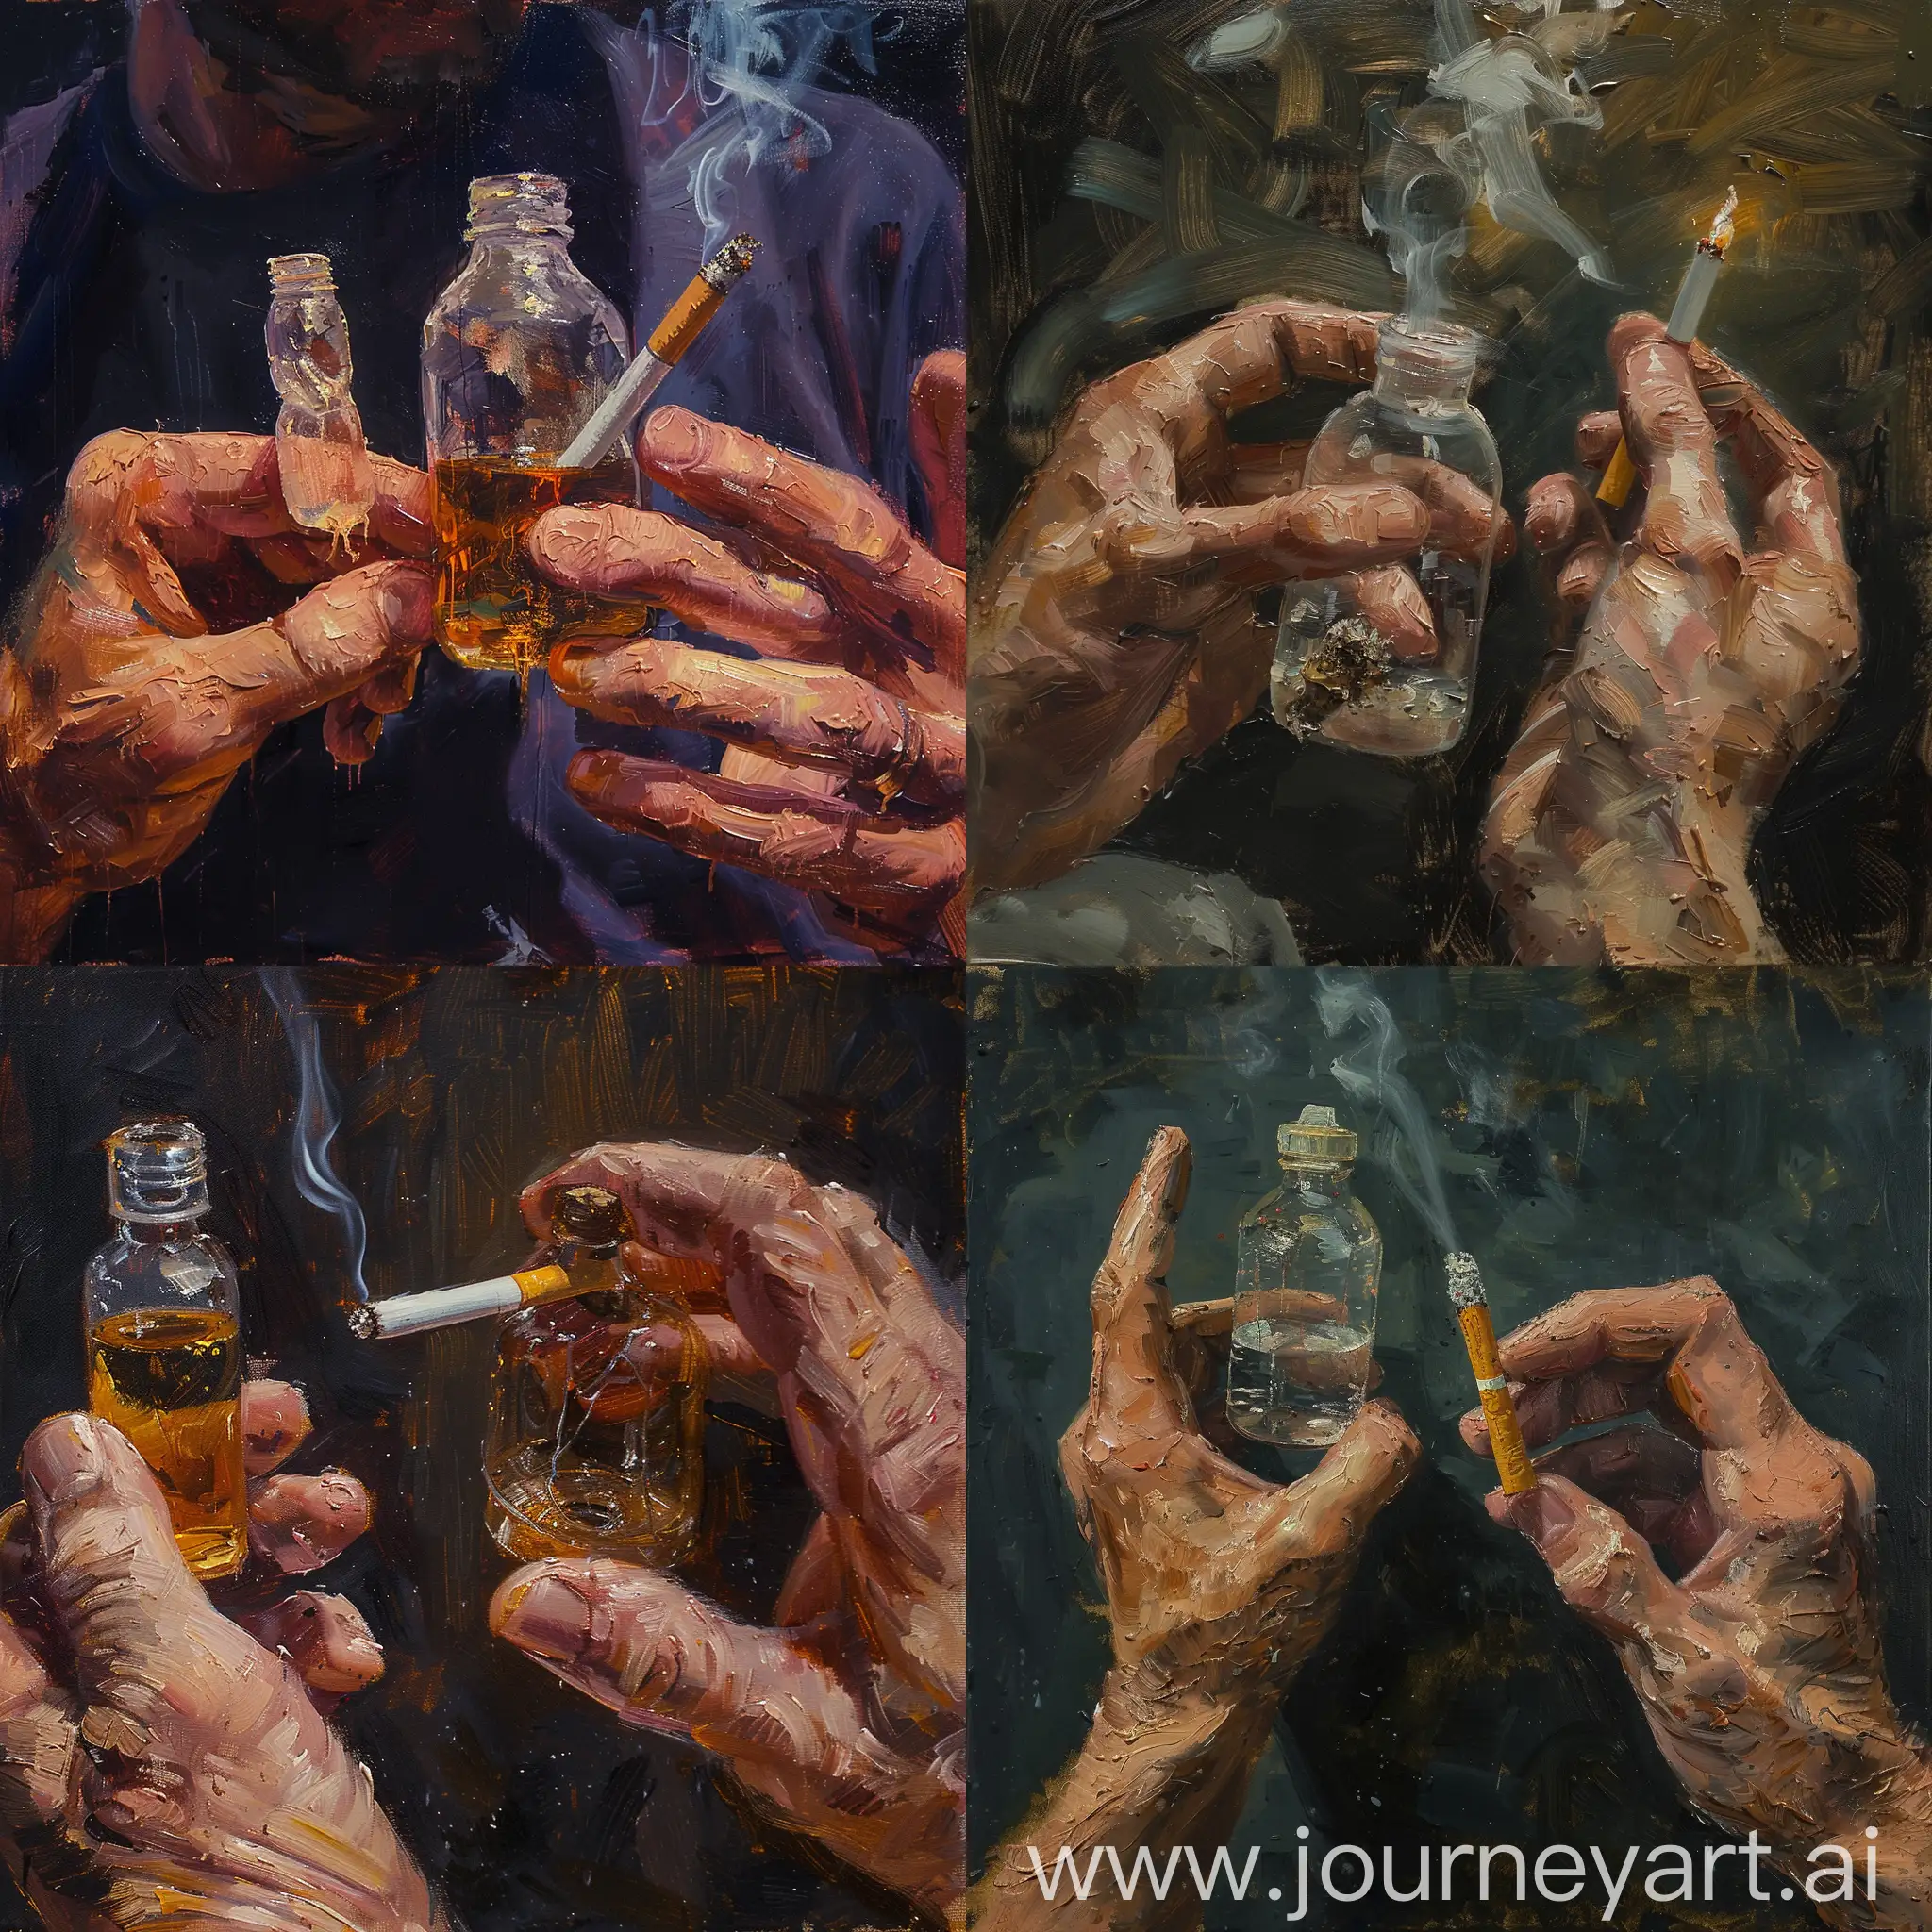 Expressive-Oil-Painting-Artist-with-Unique-Tools-and-Smoking